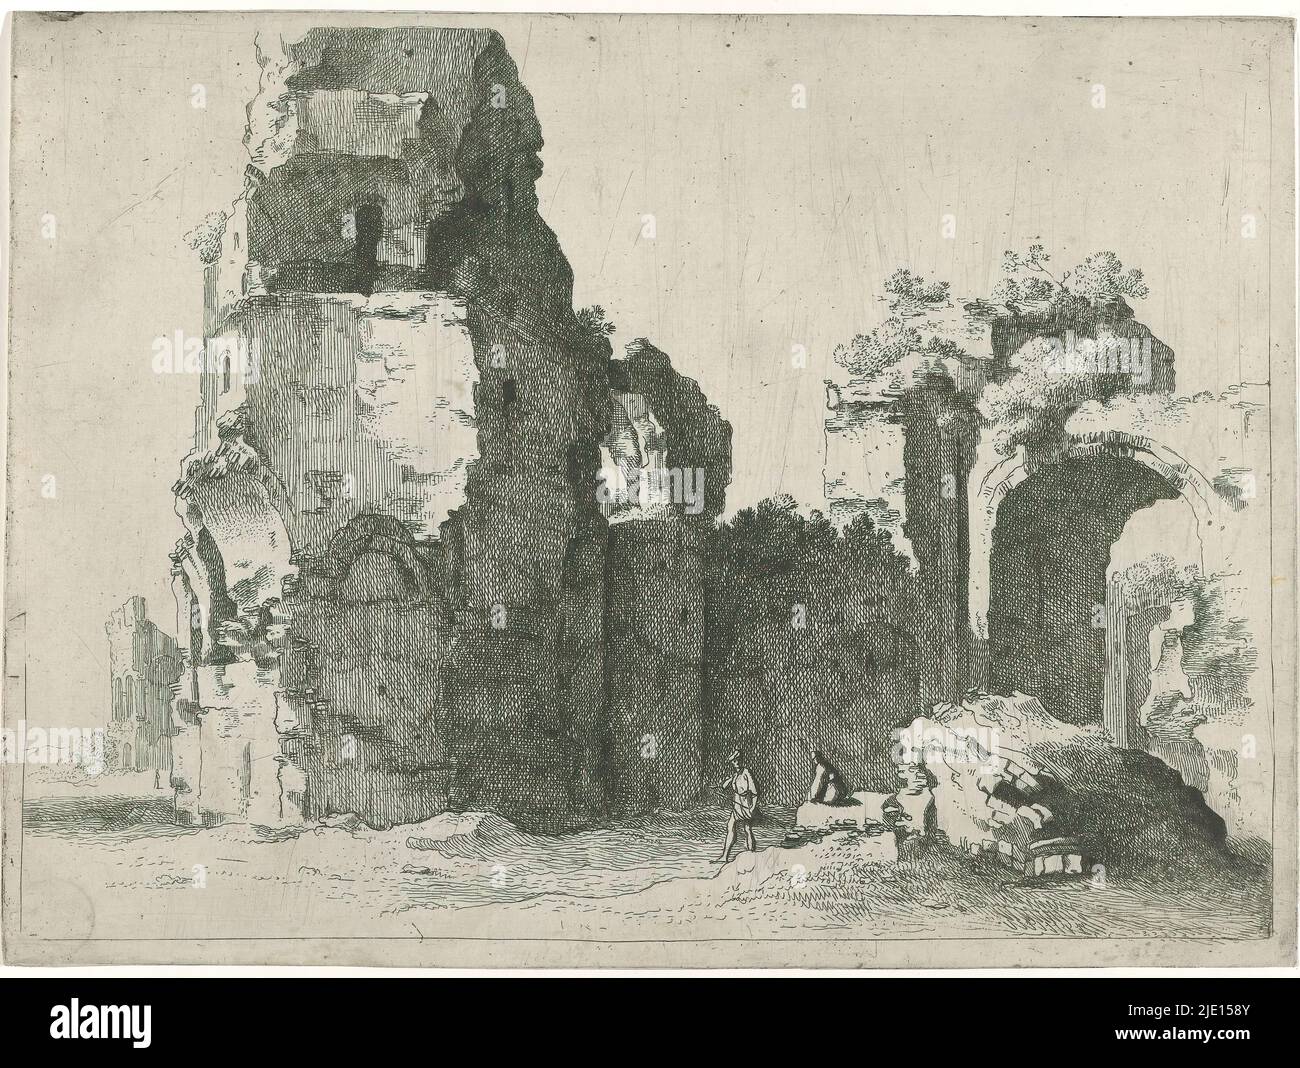 Roman ruins with two figures, Roman ruins with two figures from the series Pars murorum Romae veteris., print maker: Jan Gerritsz. van Bronckhorst, (mentioned on object), after drawing by: Cornelis van Poelenburch, (mentioned on object), 1613 - 1661, paper, etching, height 195 mm × width 265 mm Stock Photo